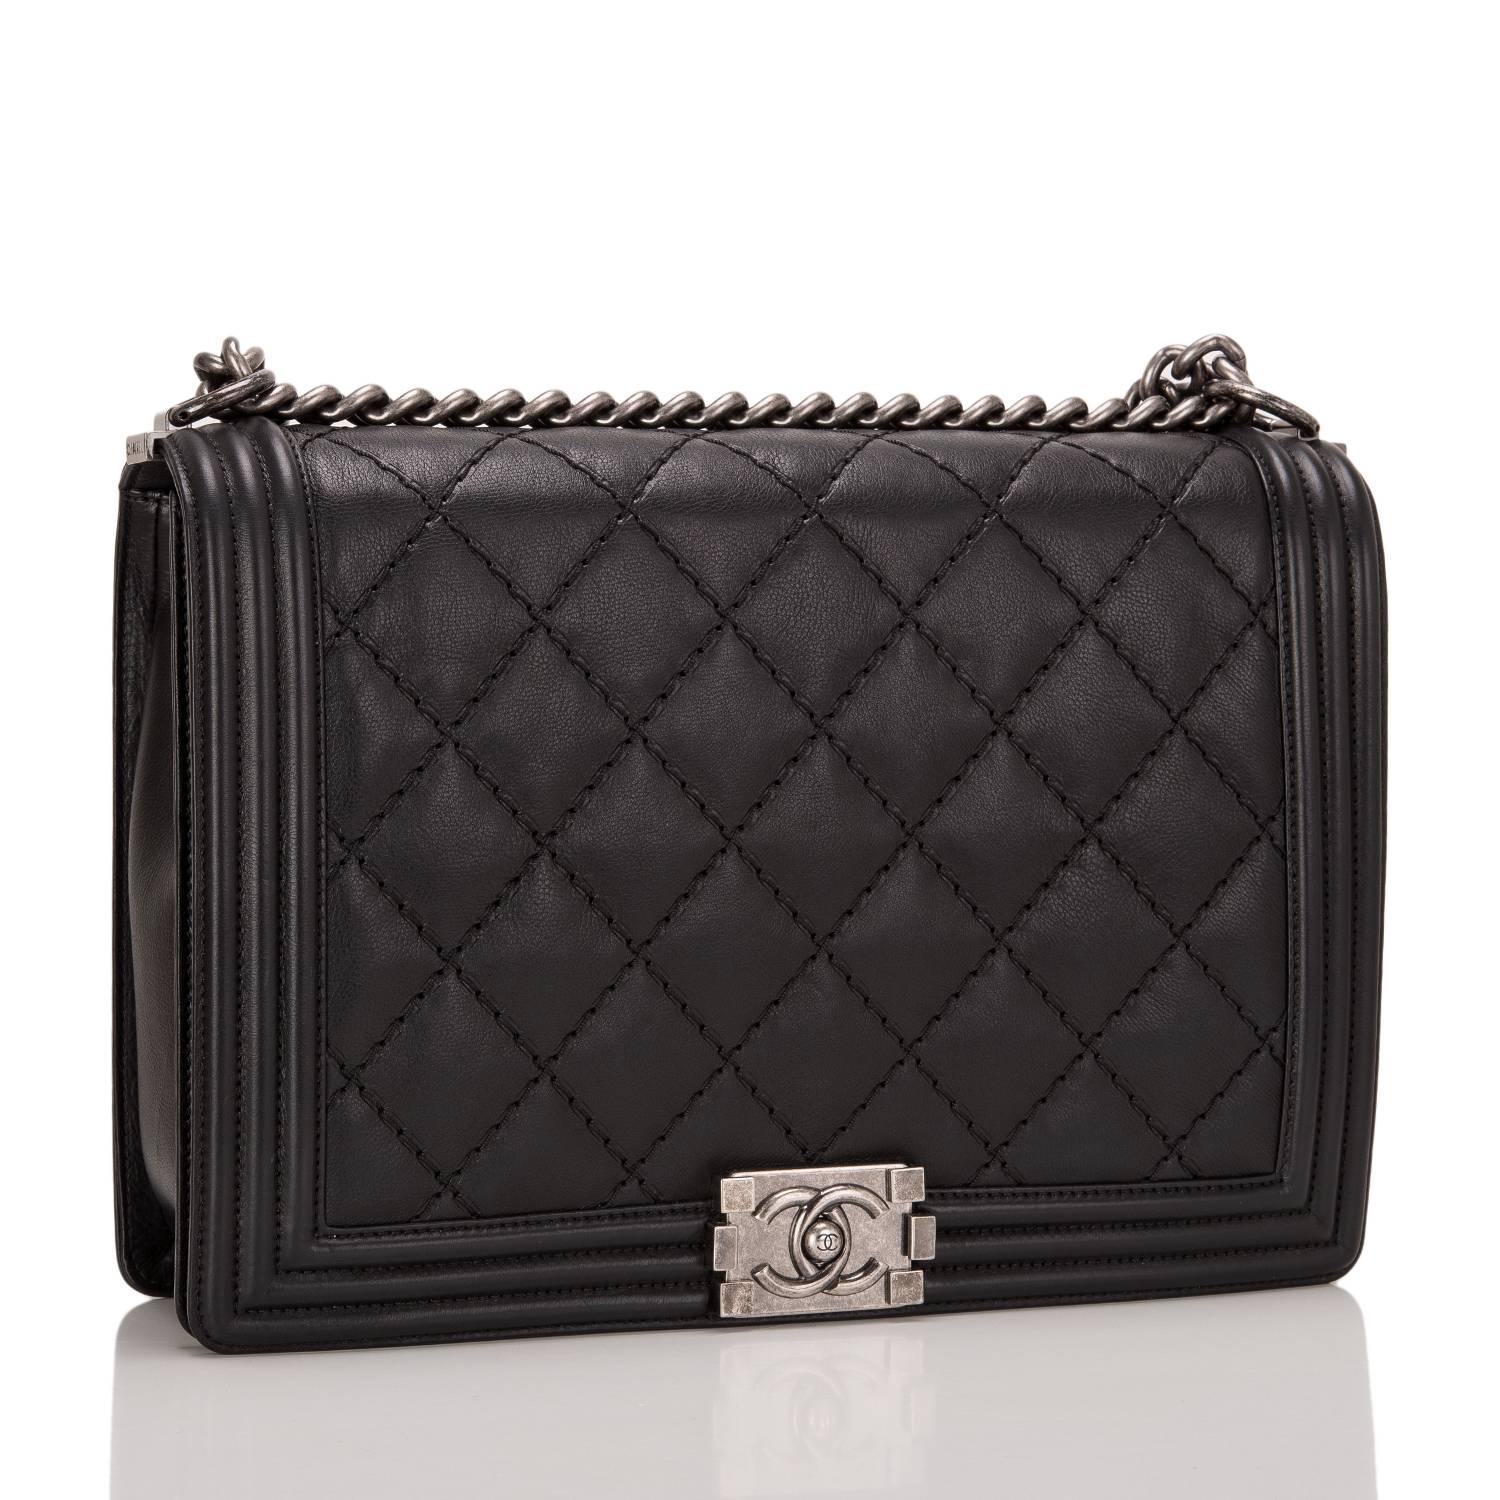 This Large Boy bag is made of pearlized black calfskin leather and accented with aged ruthenium hardware.

The bag features double quilted leather trims in smooth calfskin, a full front flap with the Boy signature CC push lock closure, and a